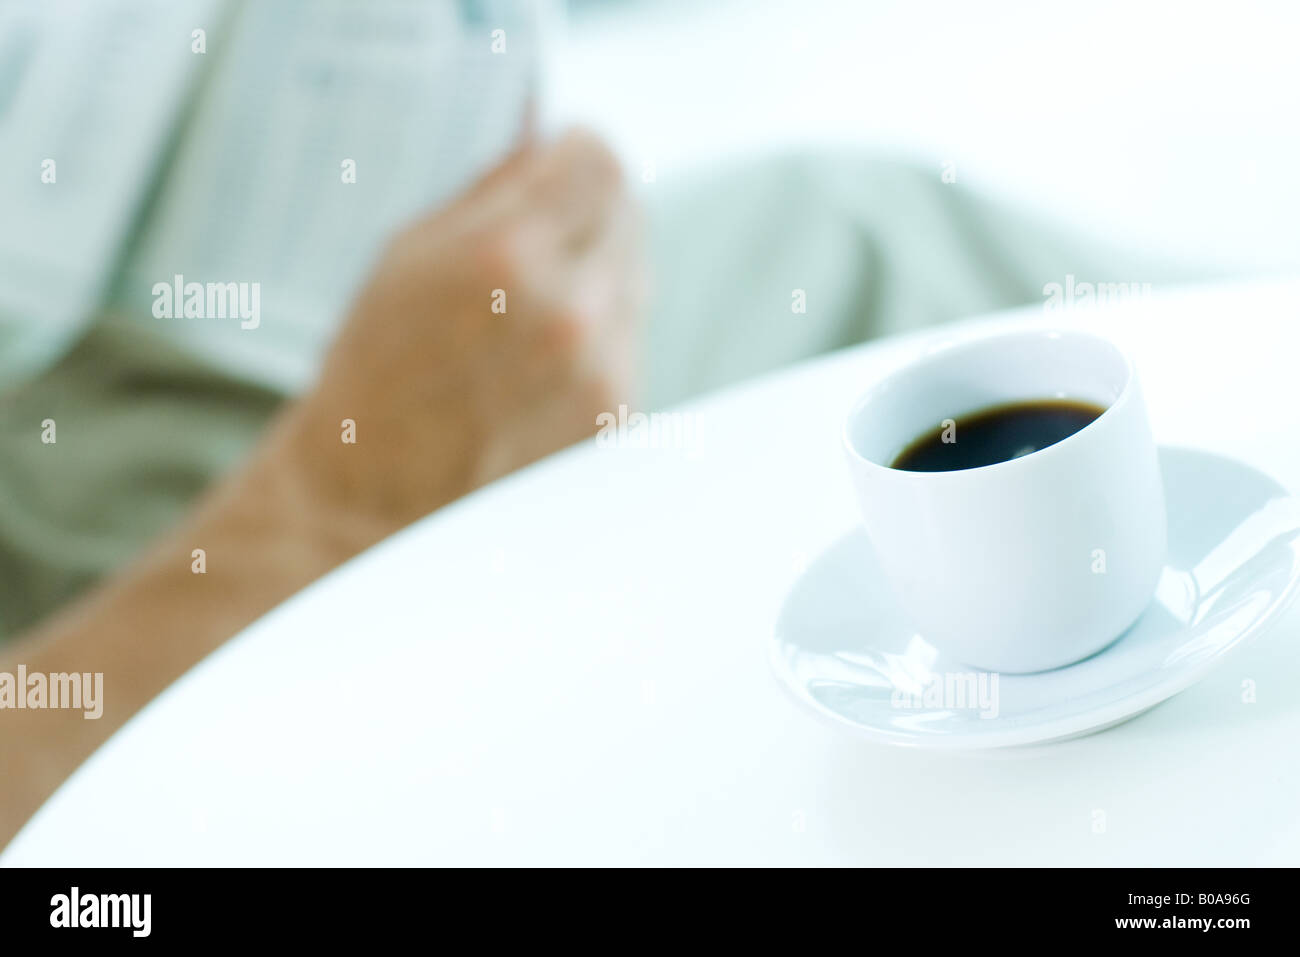 Man reading newspaper, focus on coffee cup in foreground Stock Photo